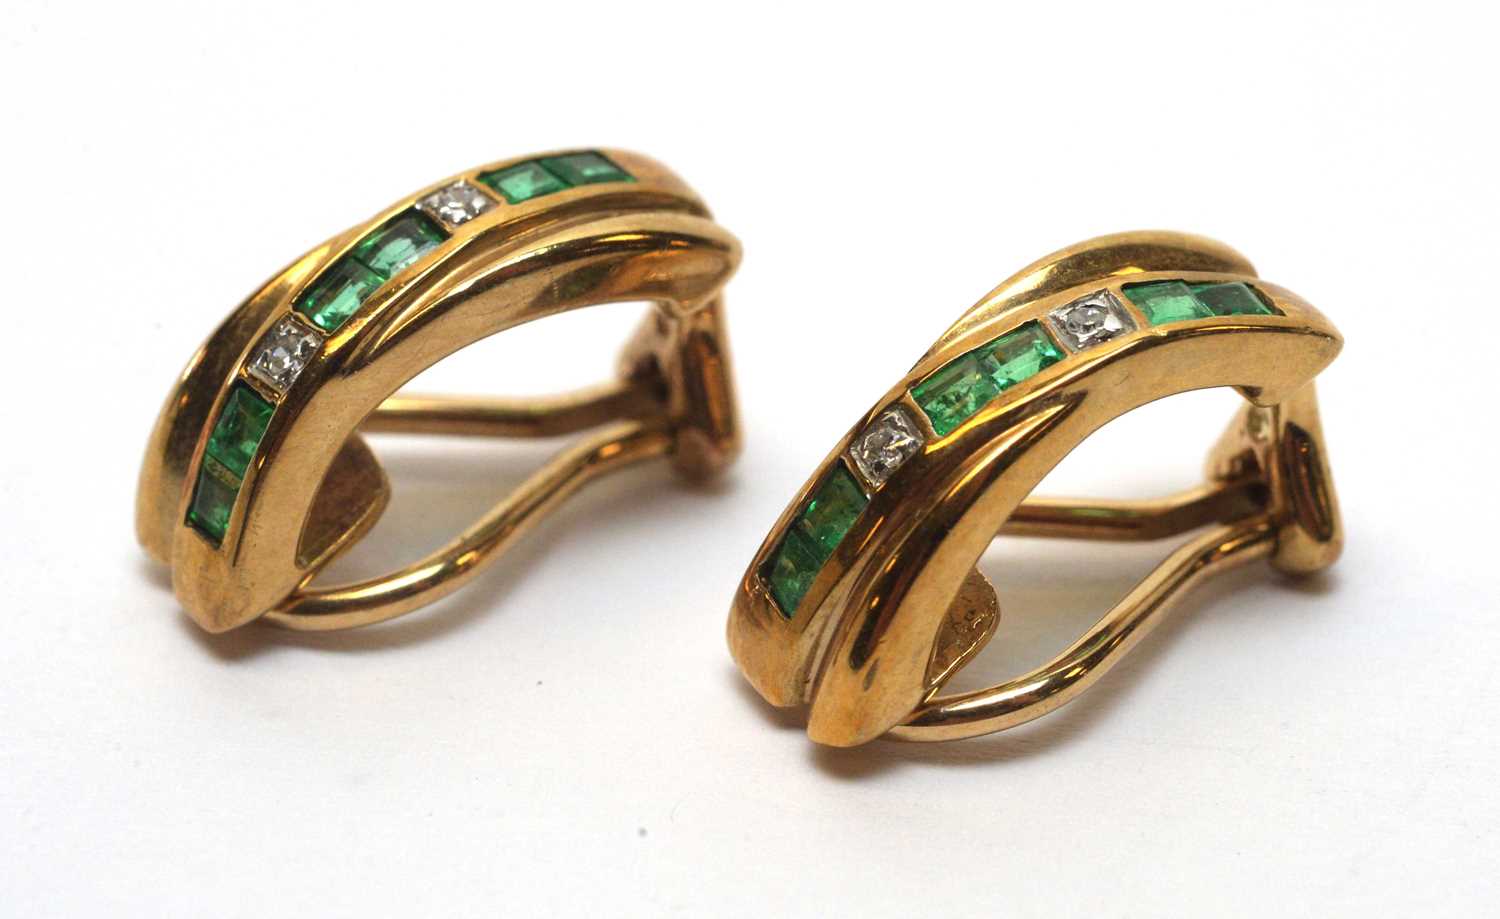 Lot 233 - A pair of emerald and diamond earrings